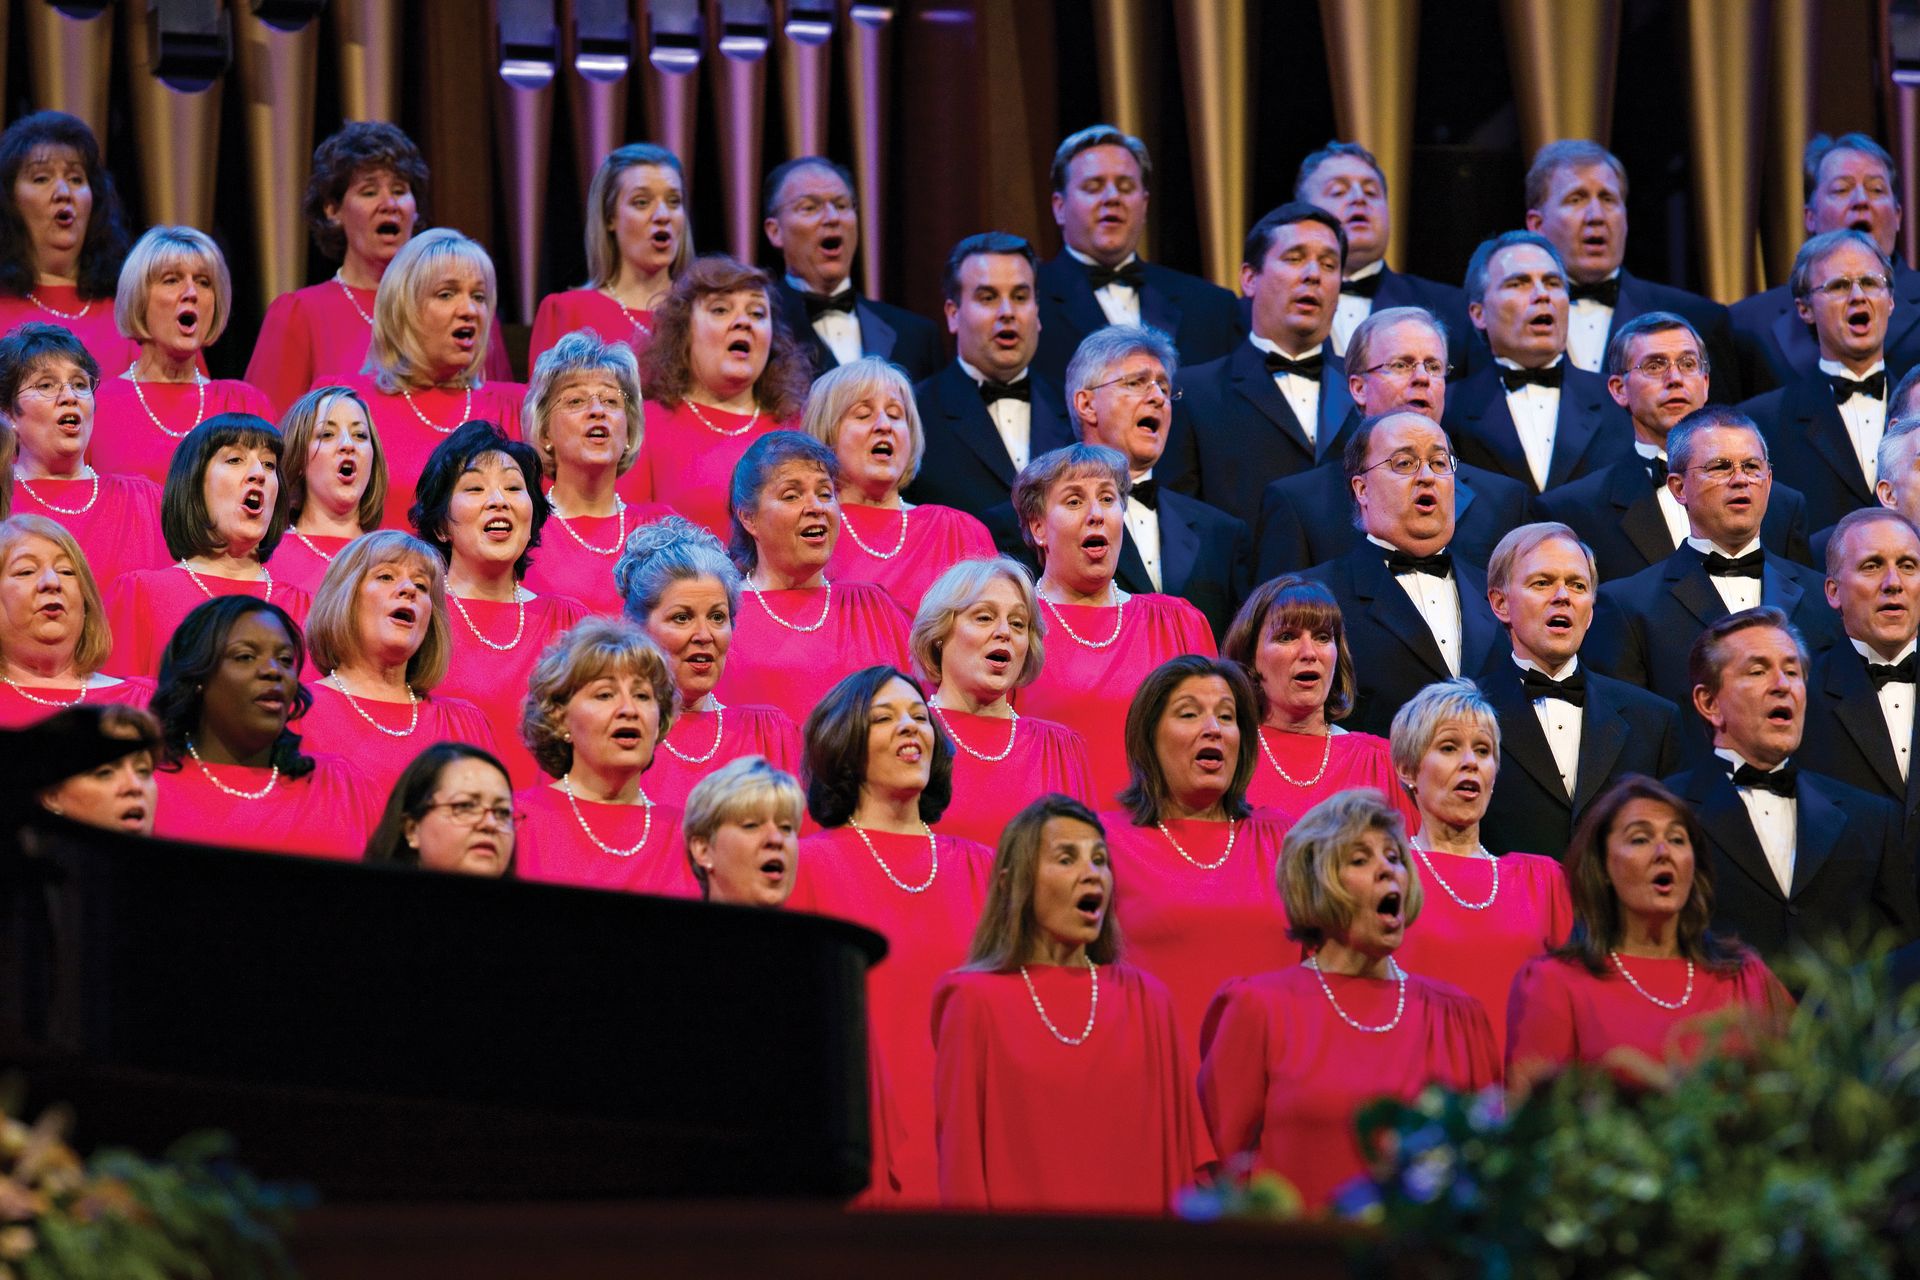 The Mormon Tabernacle Choir singing in the Pioneer Day Commemoration Concert in July 2008.